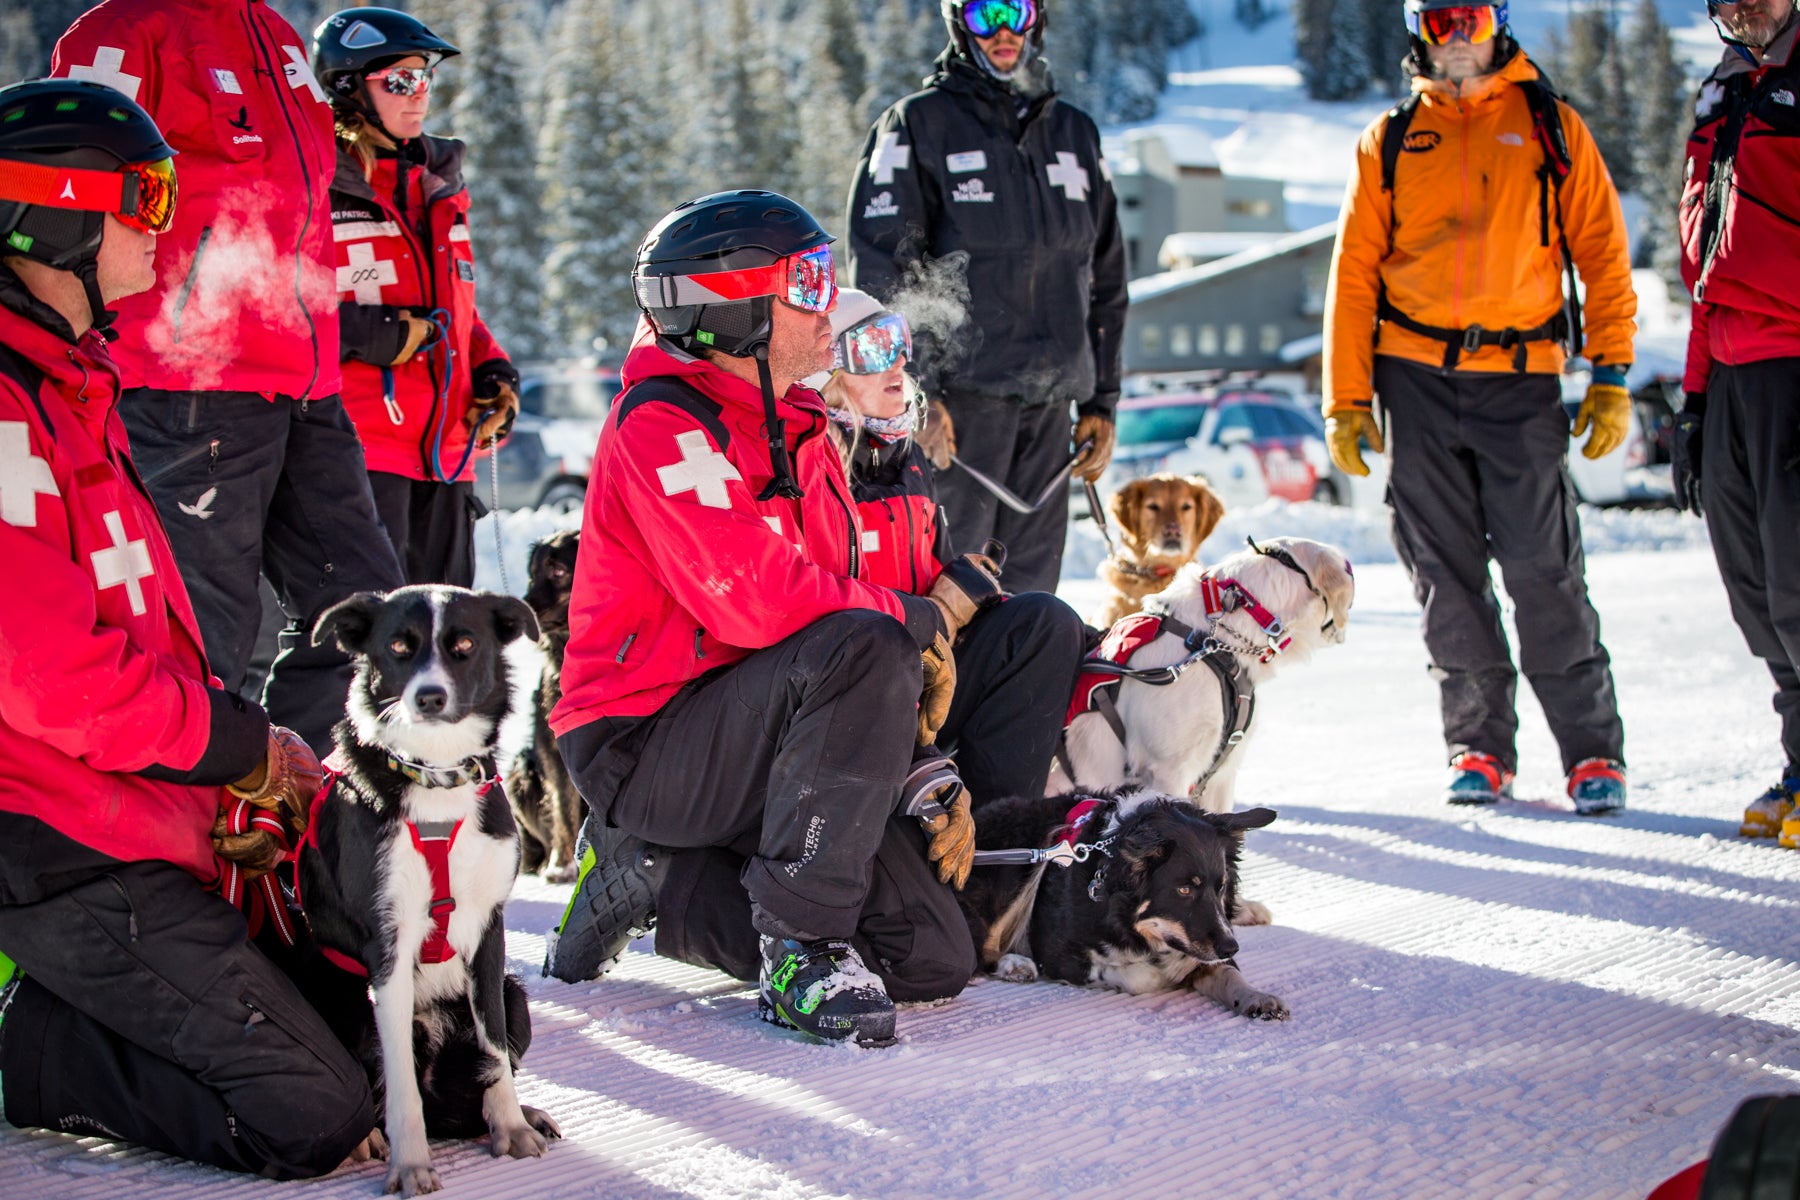 Patrollers with avalanche dogs at Mt Bachelor lined up for practice.